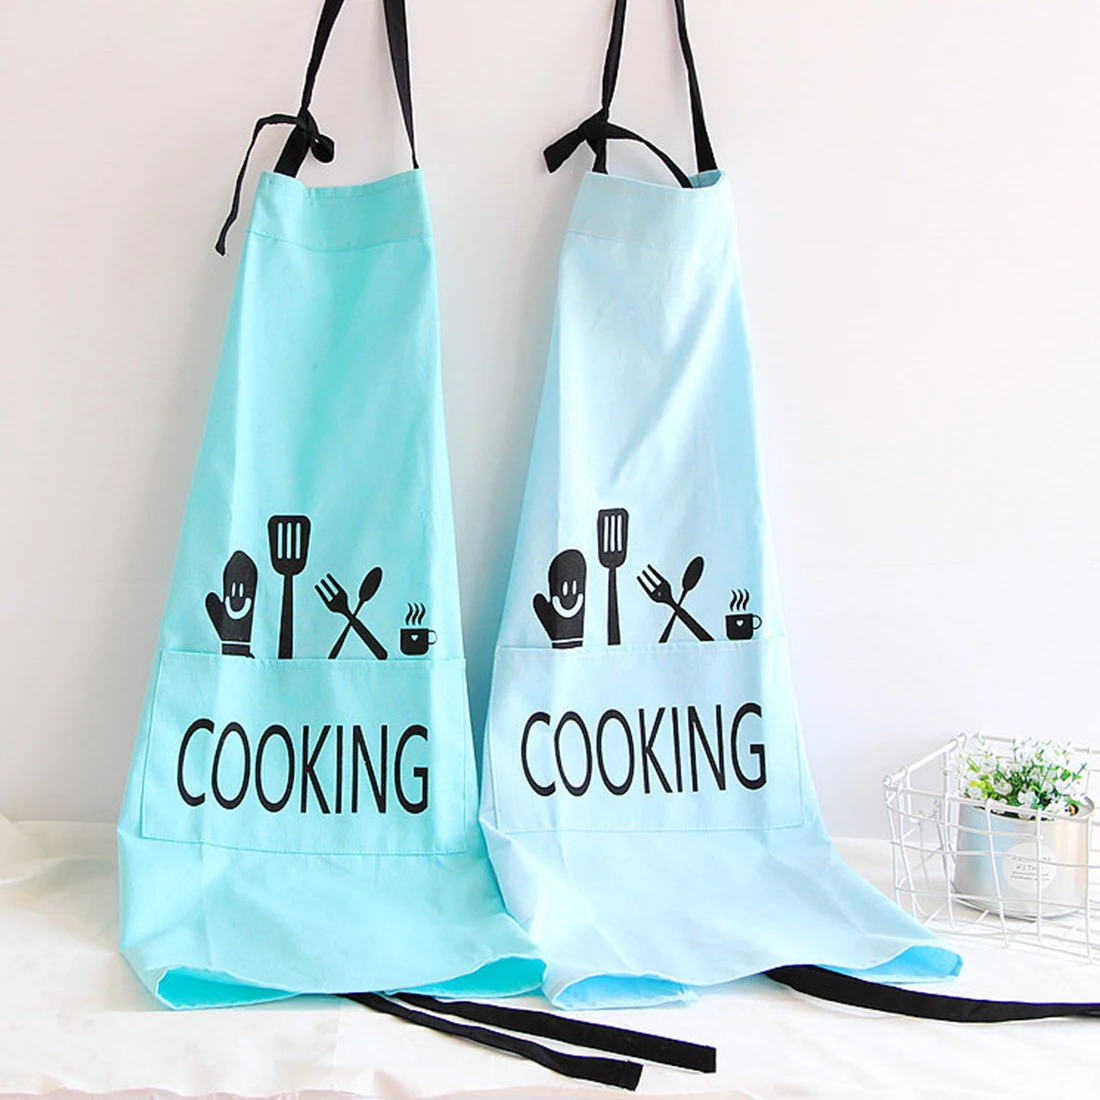 100 Cotton Linen Home Cleaning Apron Printed Unisex Cooking Aprons Party Dining Room Barbecue 